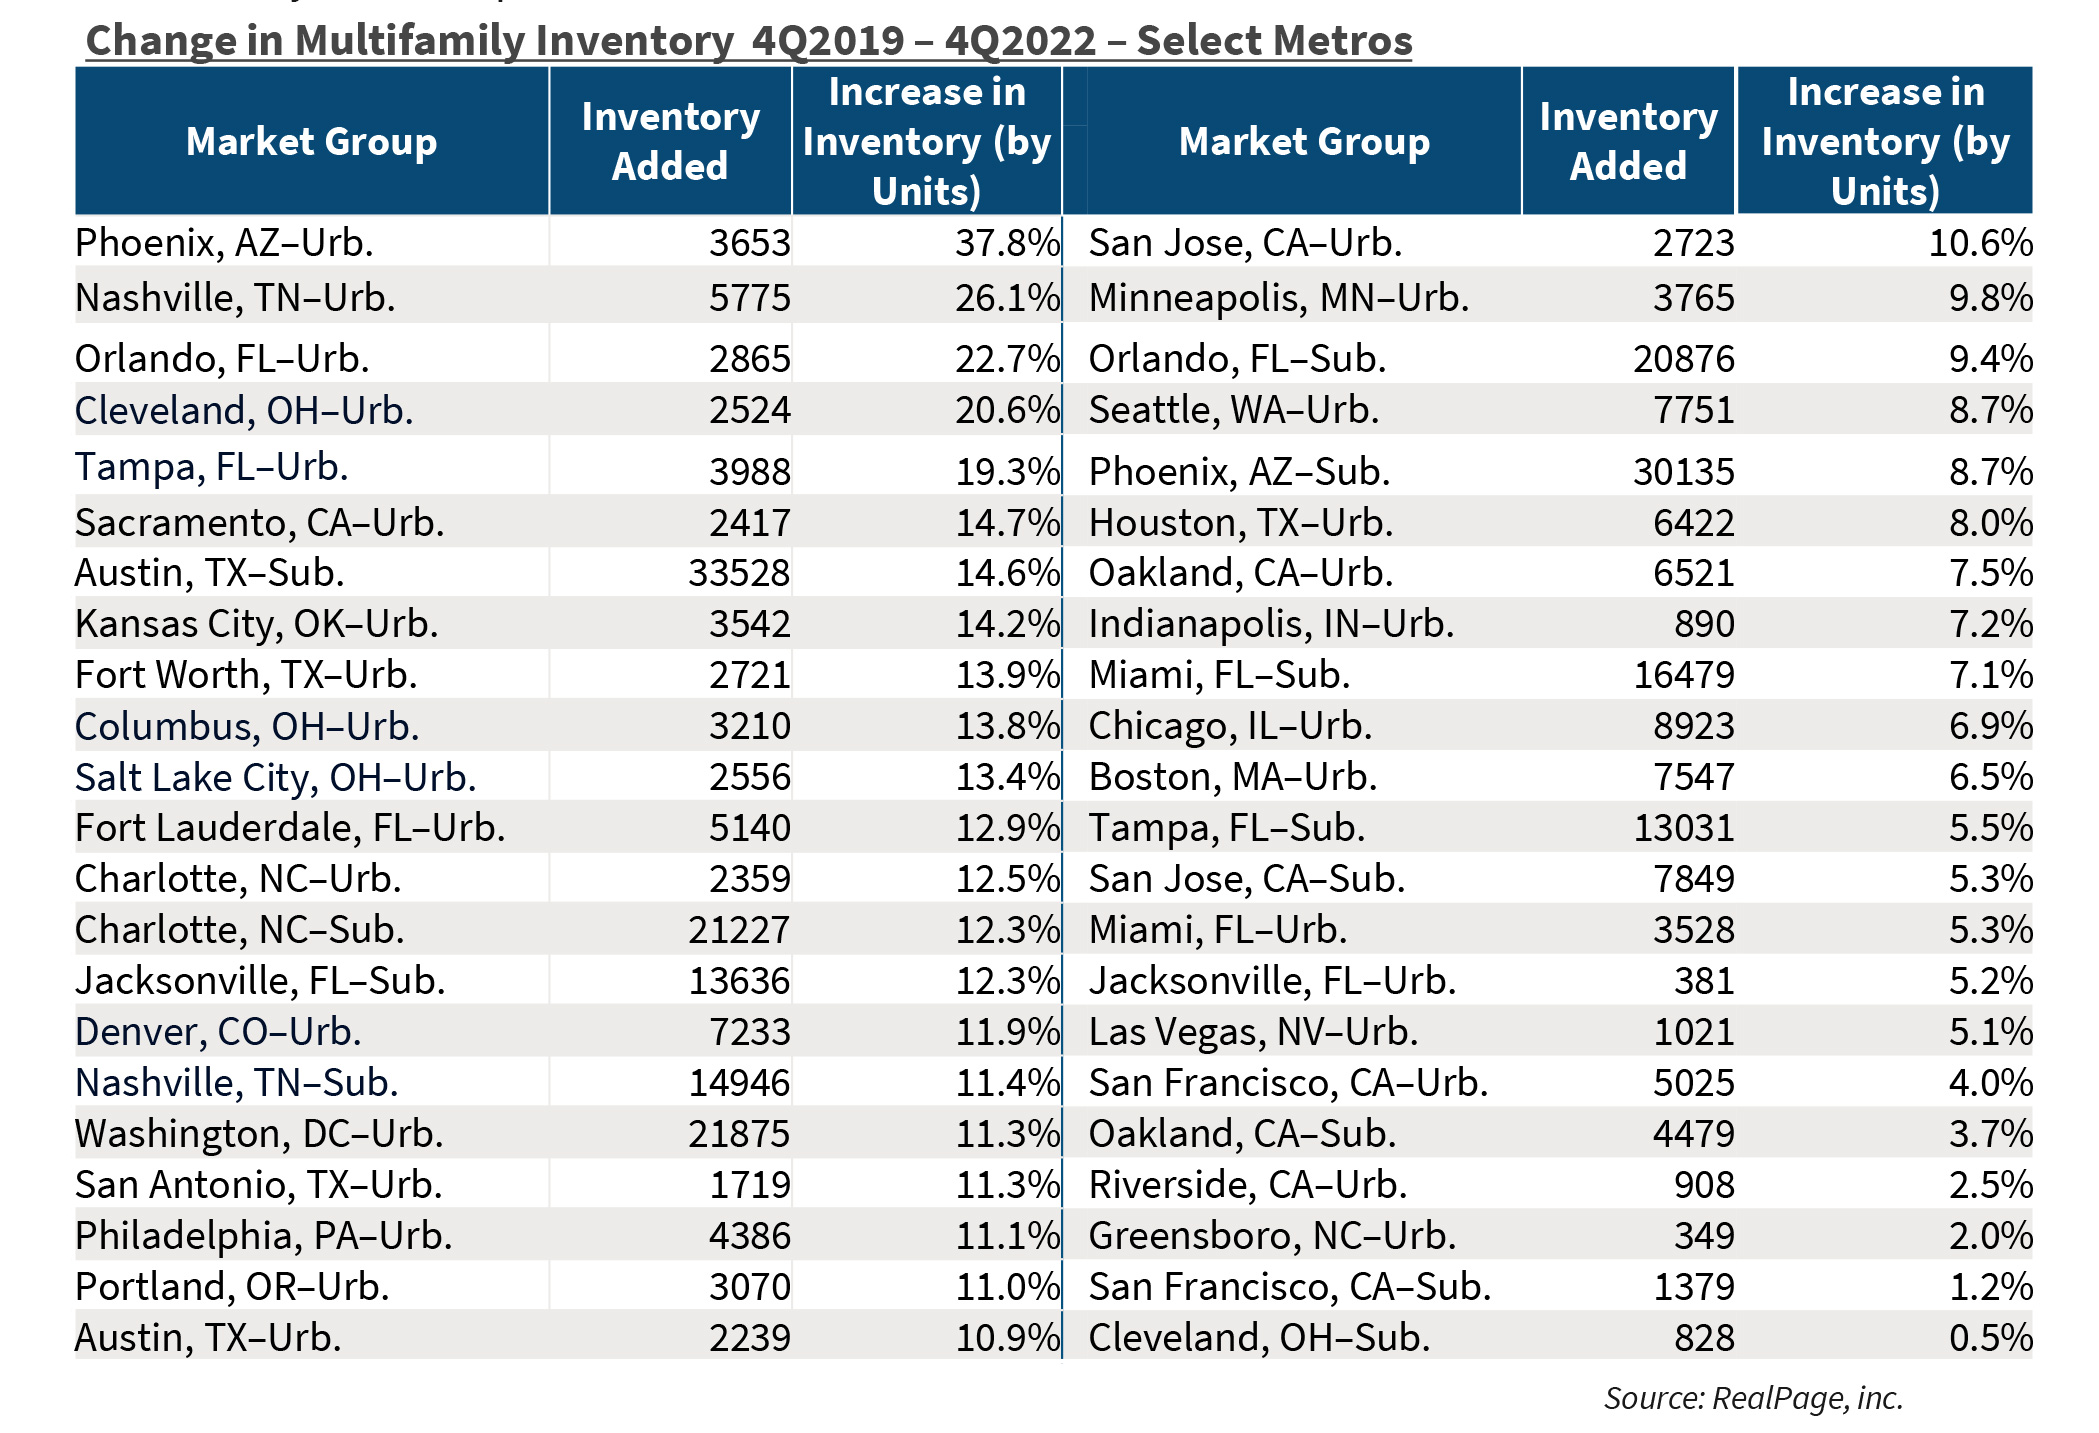 Change in Multifamily Inventory 4Q2019 – 4Q2022 – Select Metros